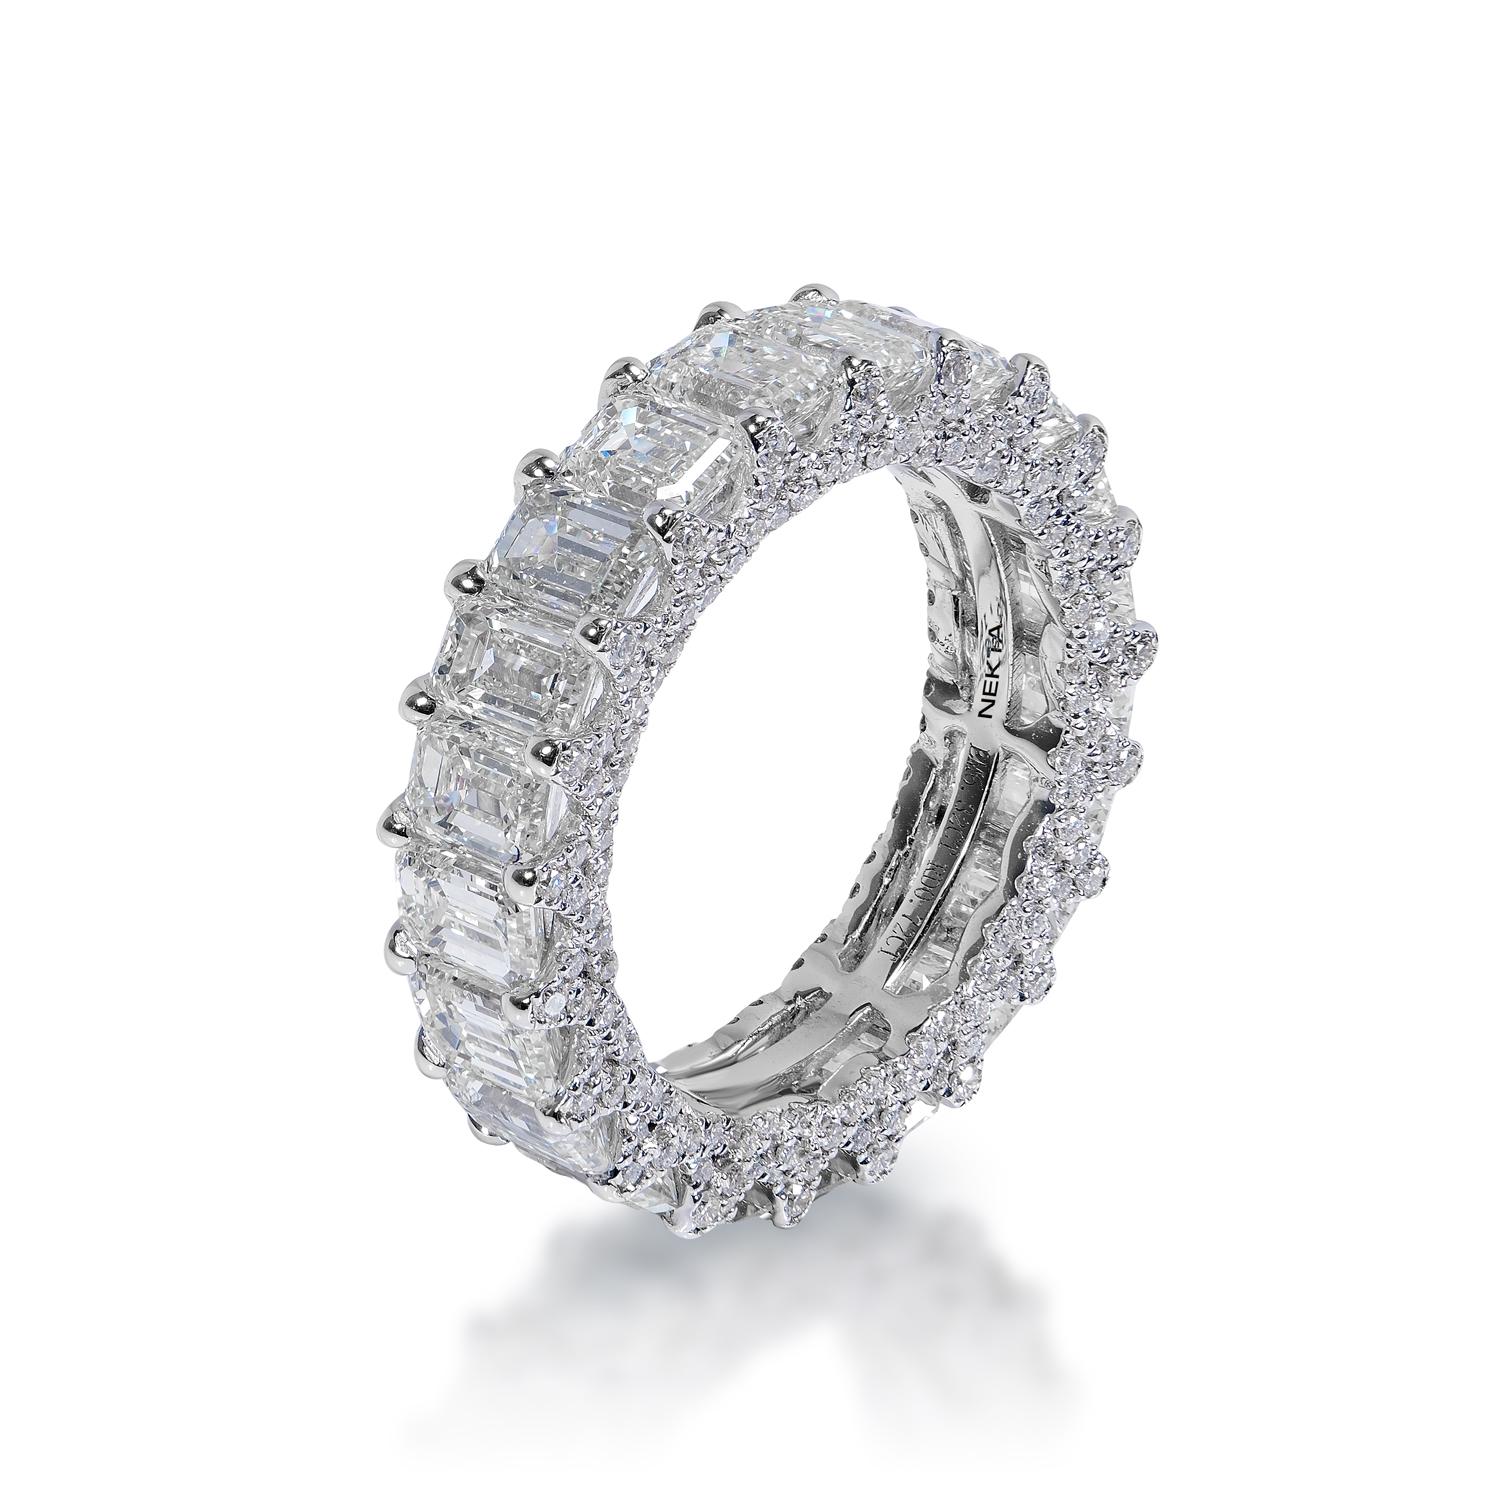 Diamond:
Carat Weight: 6.32 Carats 
Color: F.A
Style: Emerald Cut

Carat Weight: 0.72 Carats
Shape: Round Brilliant Cut
Setting: Shared Prong & pave
Metal: 14k White Gold 5.10 grams

Total Carat Weight: 7.04 Carats